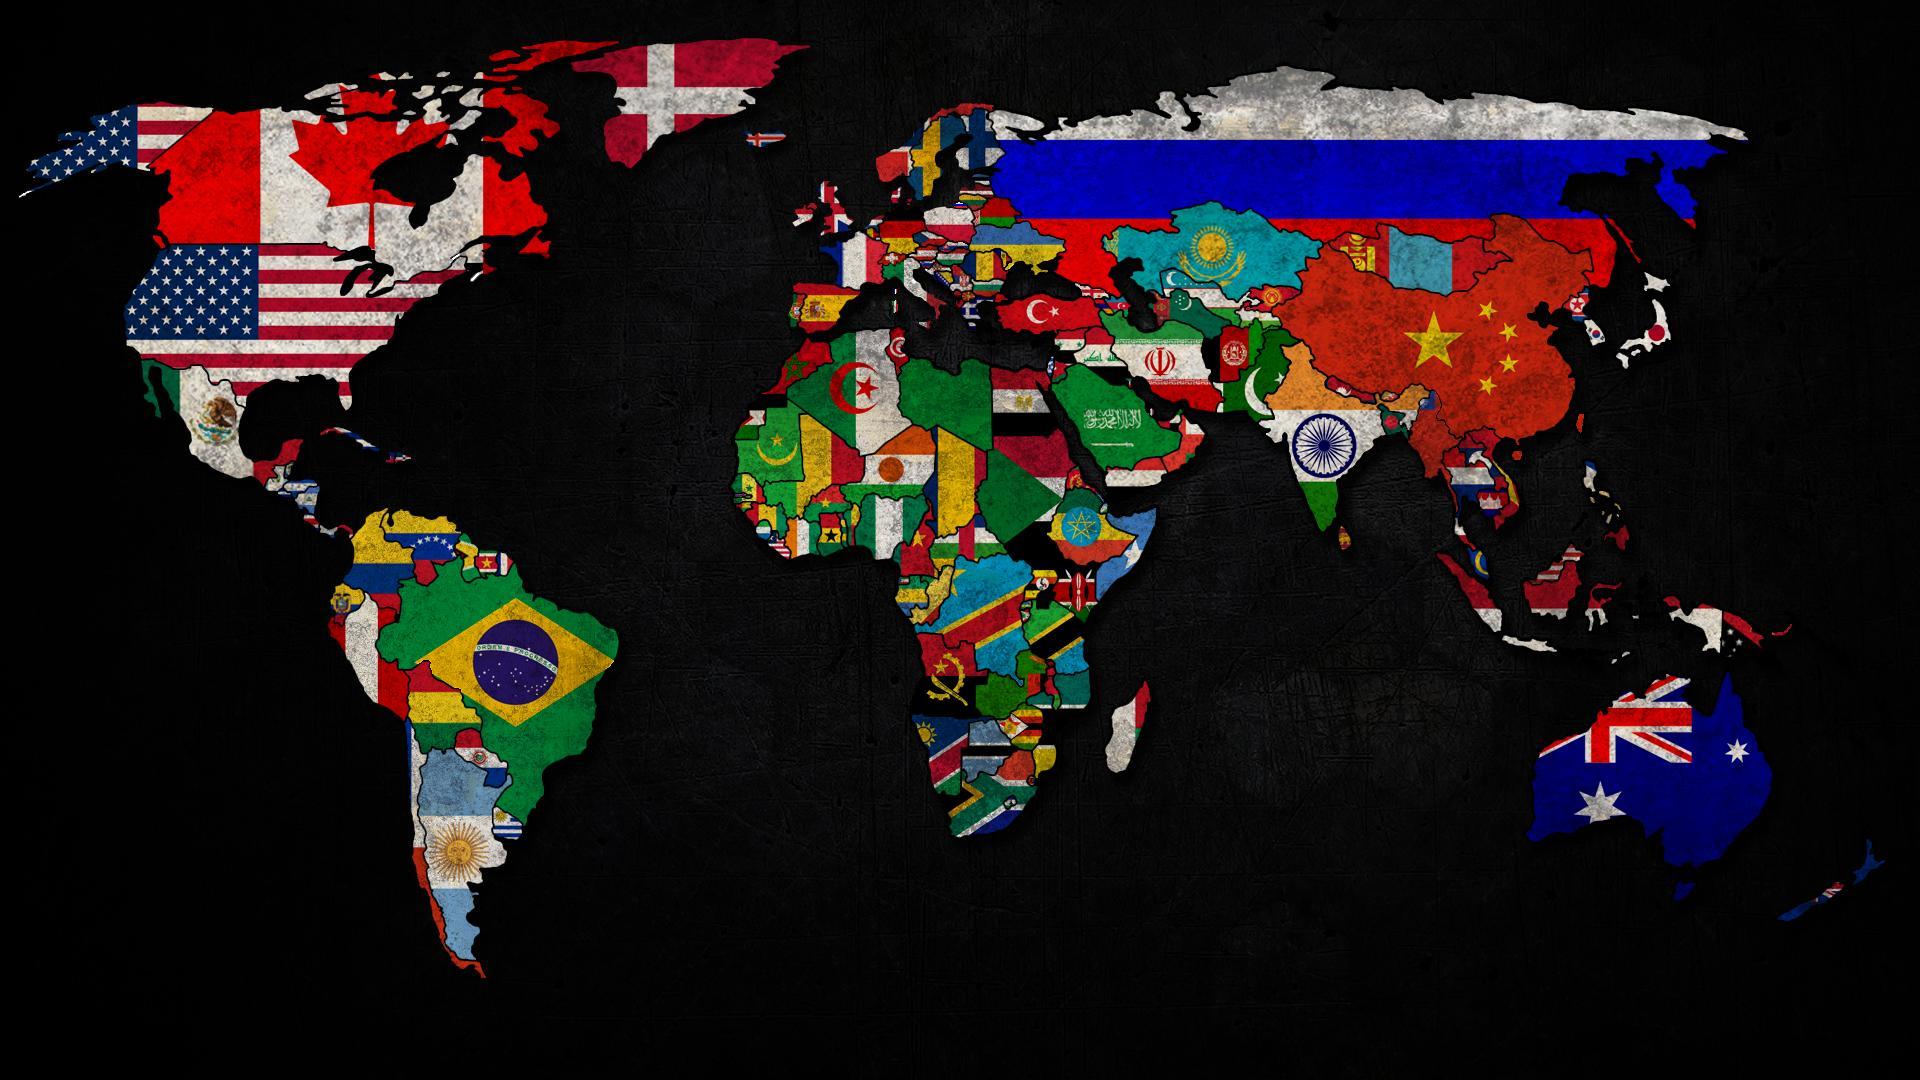 World of Flags [1920x1080]